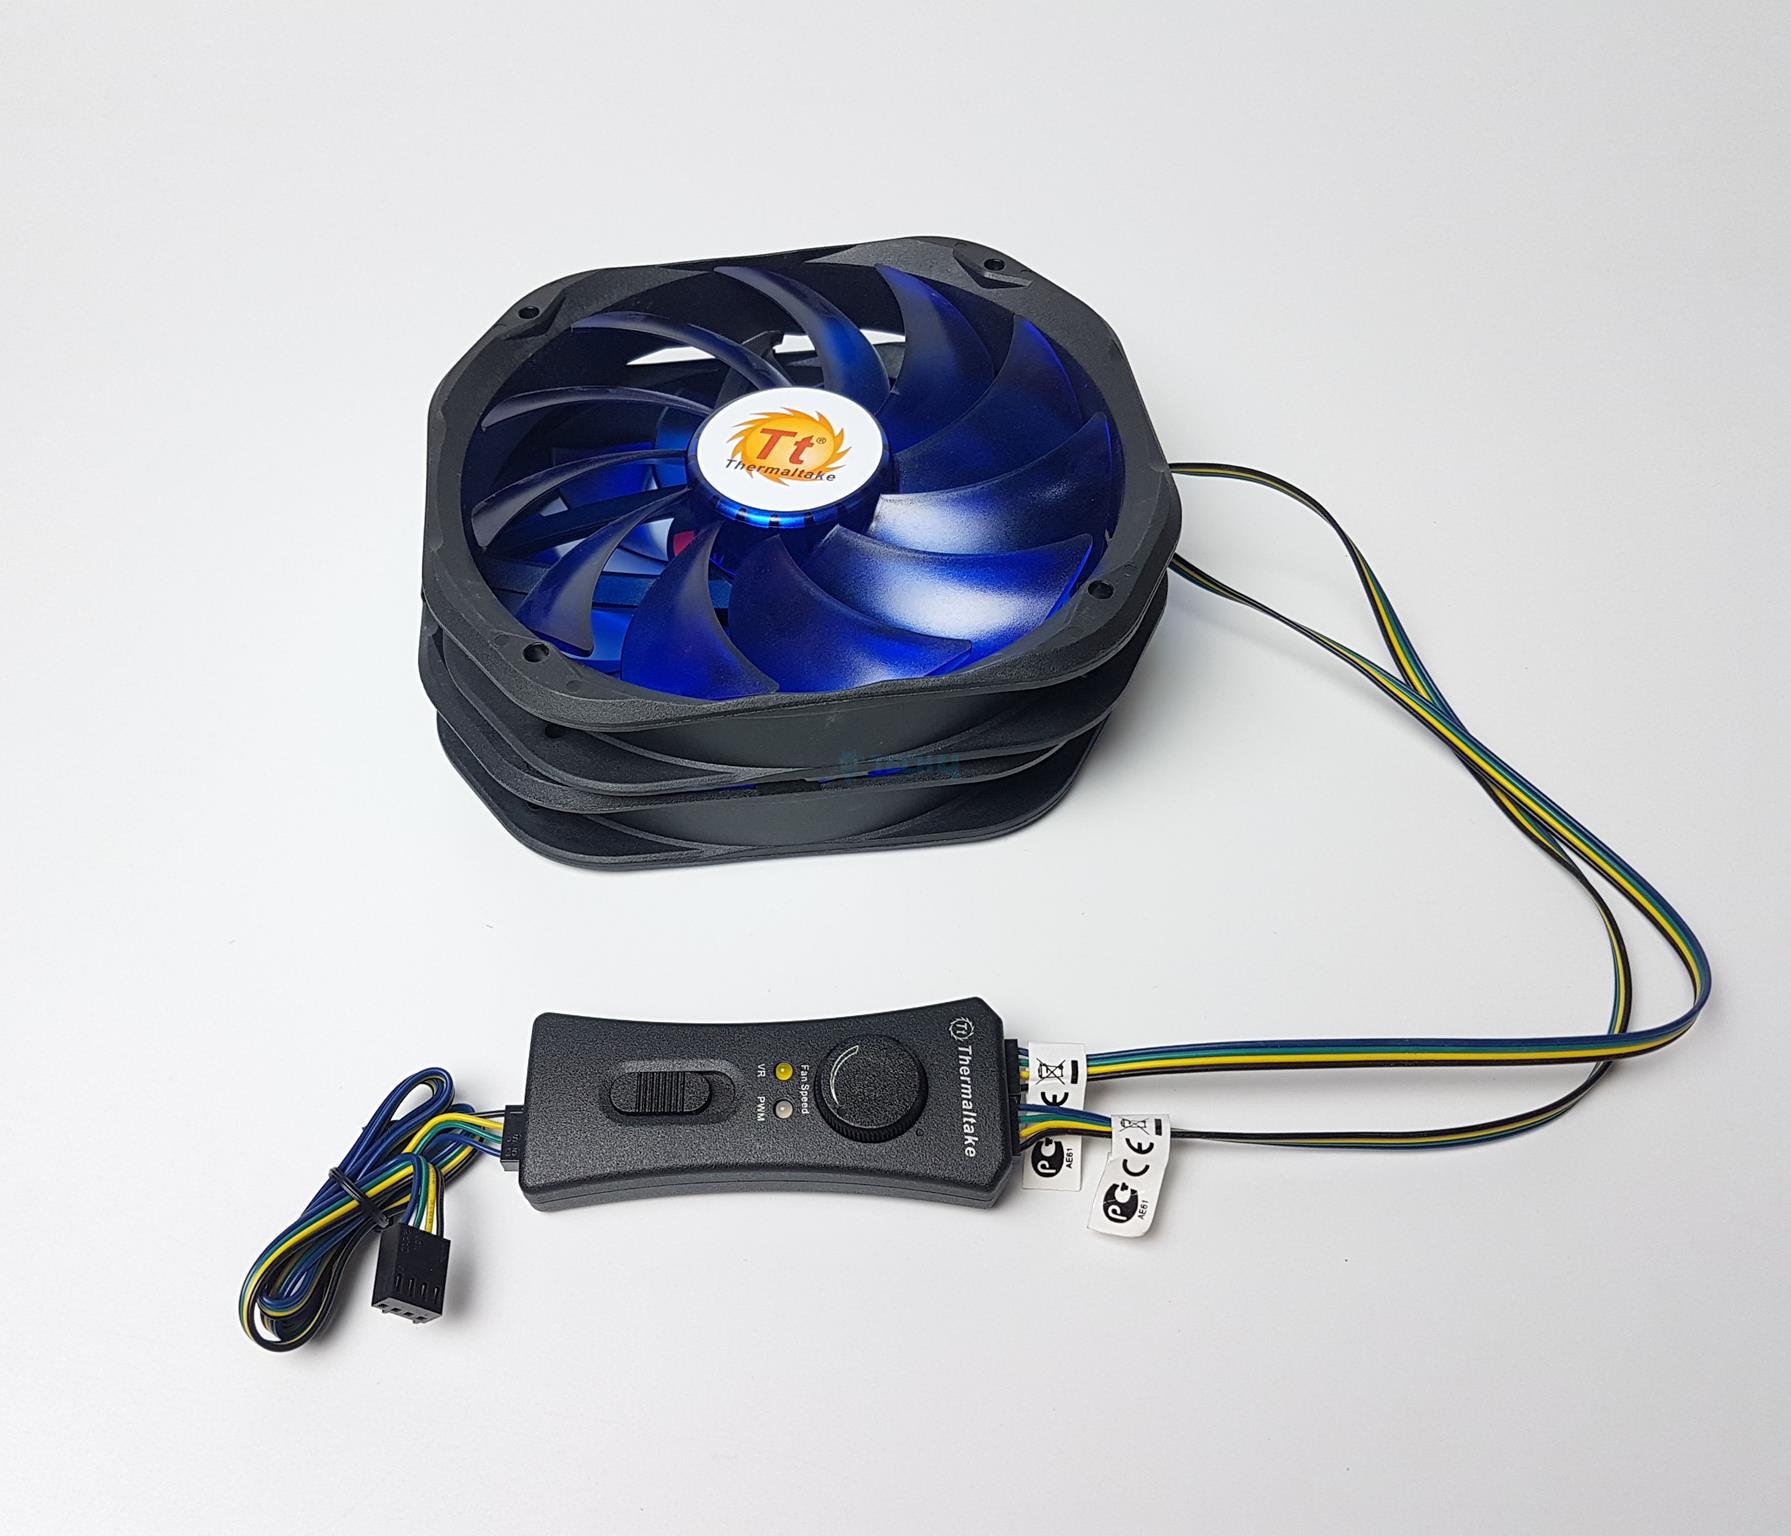 Frio extreme fan with connected with controller